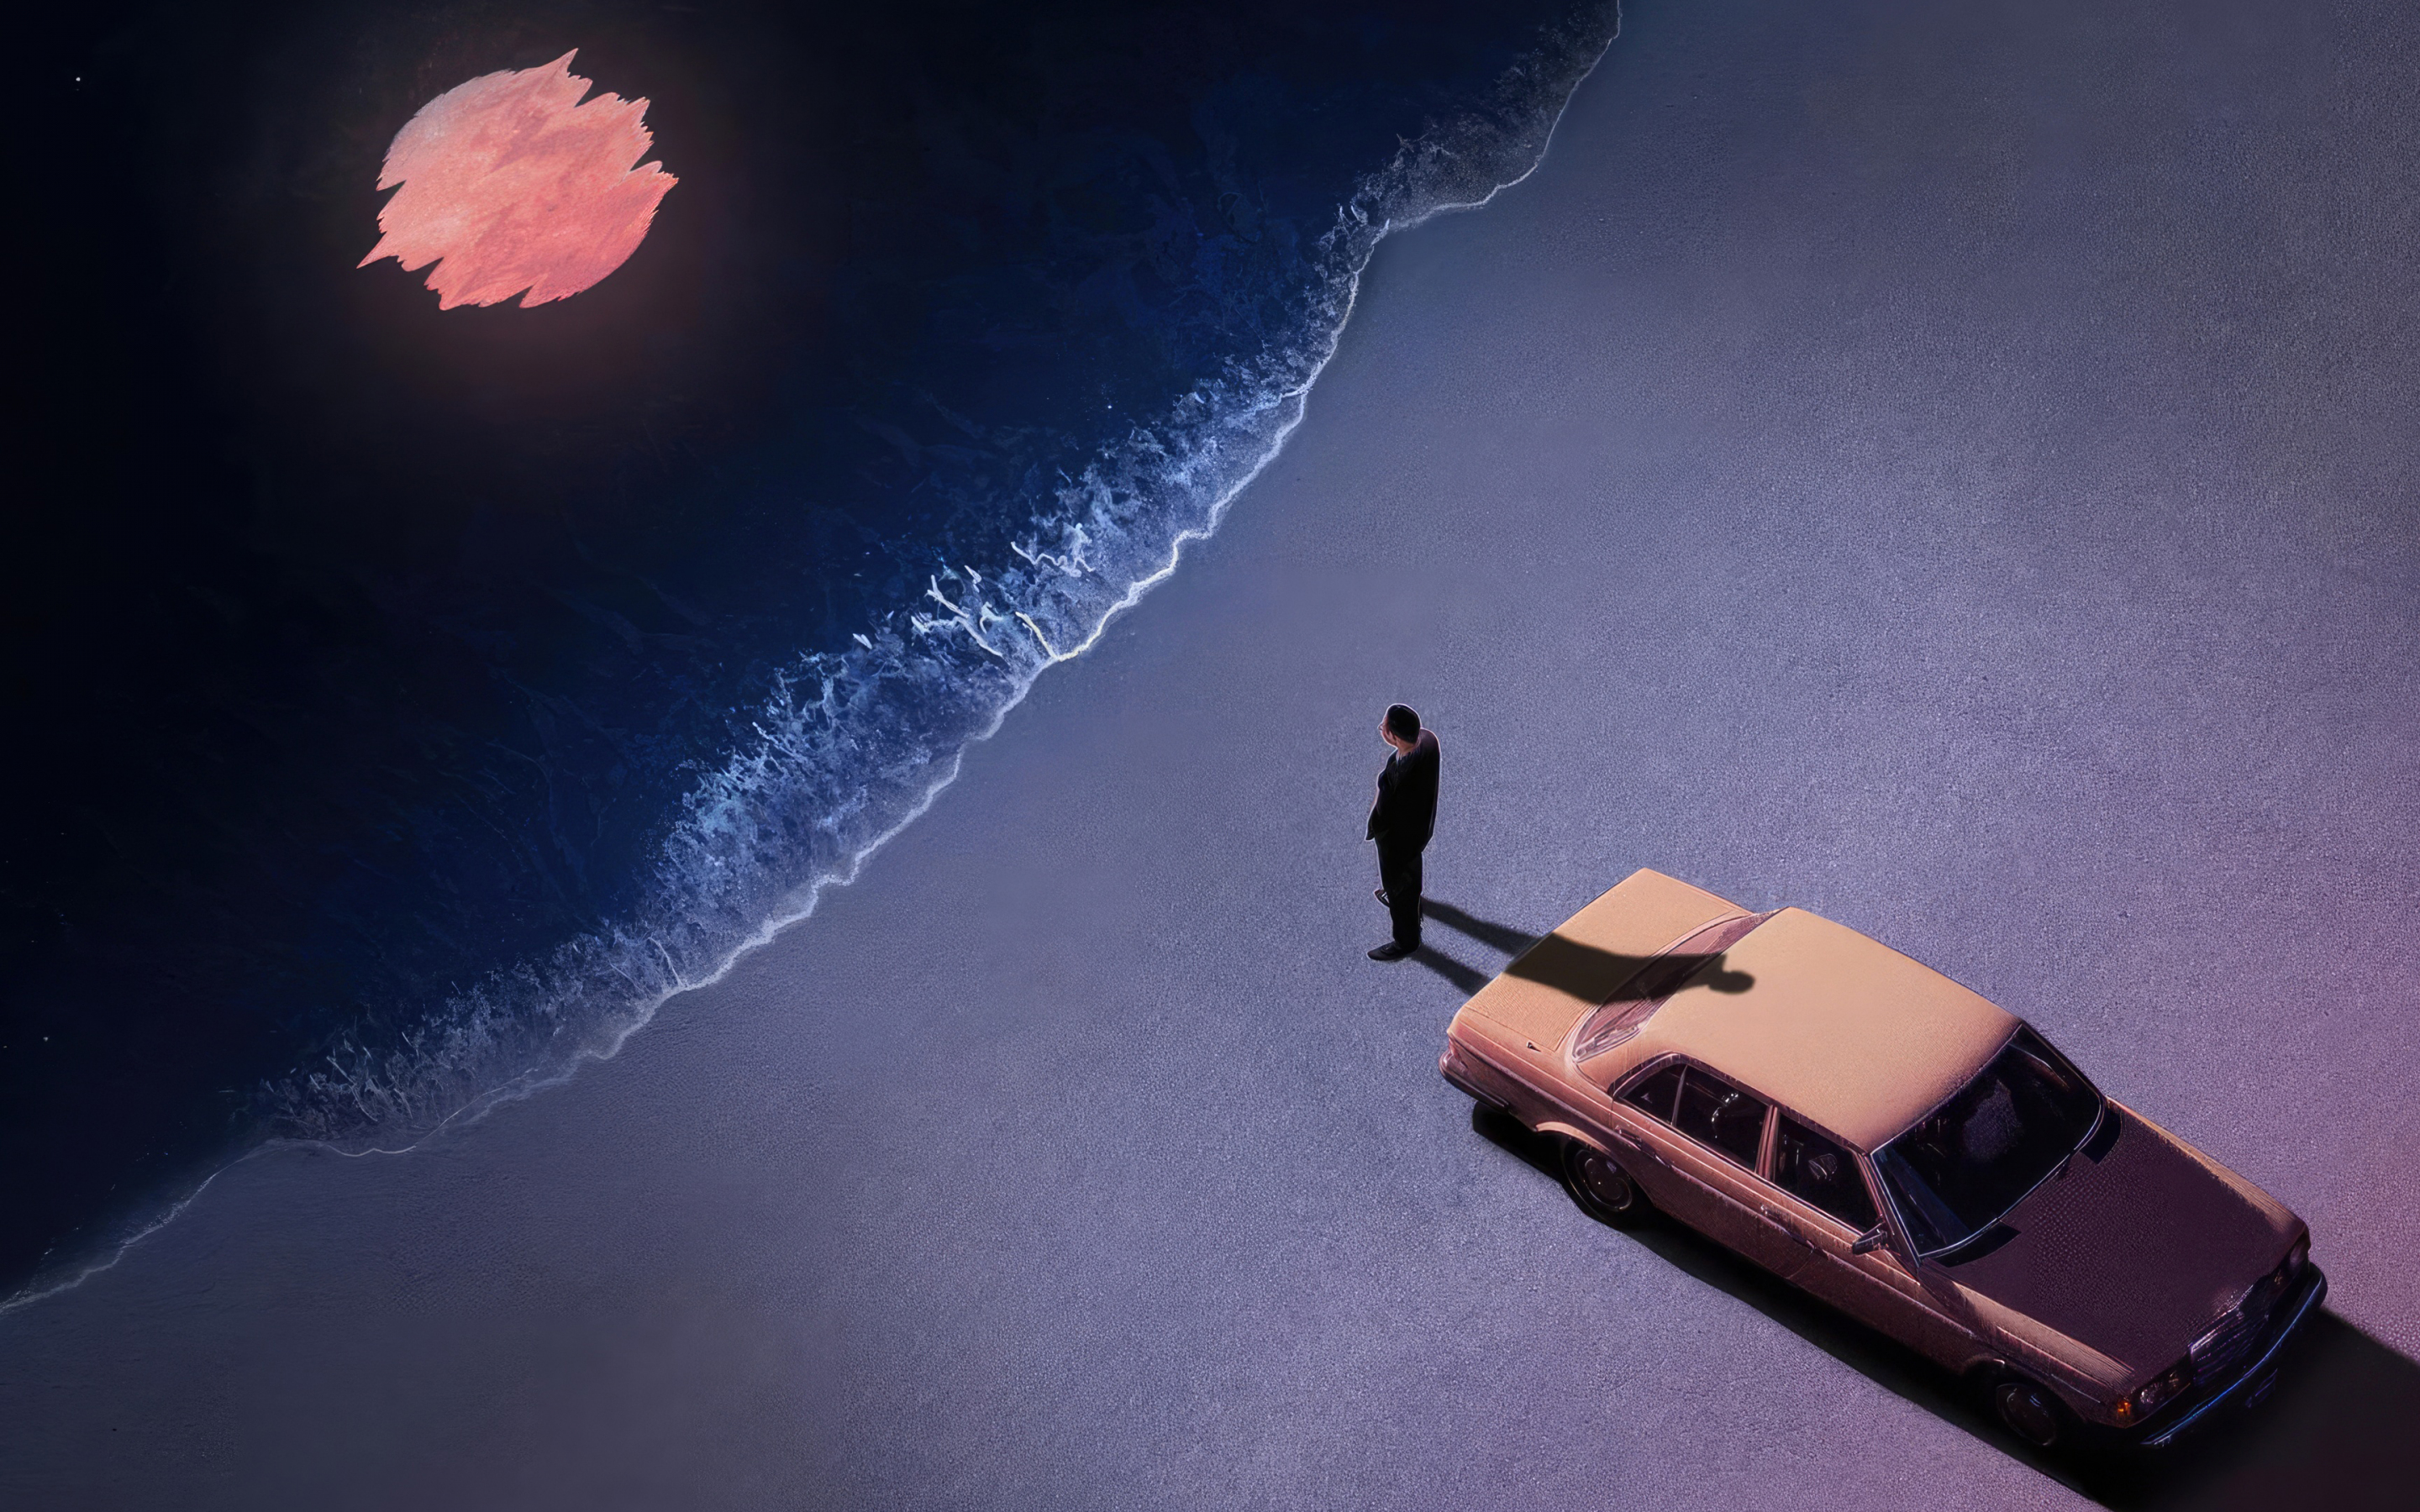 Lonely at night at the beach, car and man, art , 2880x1800 wallpaper